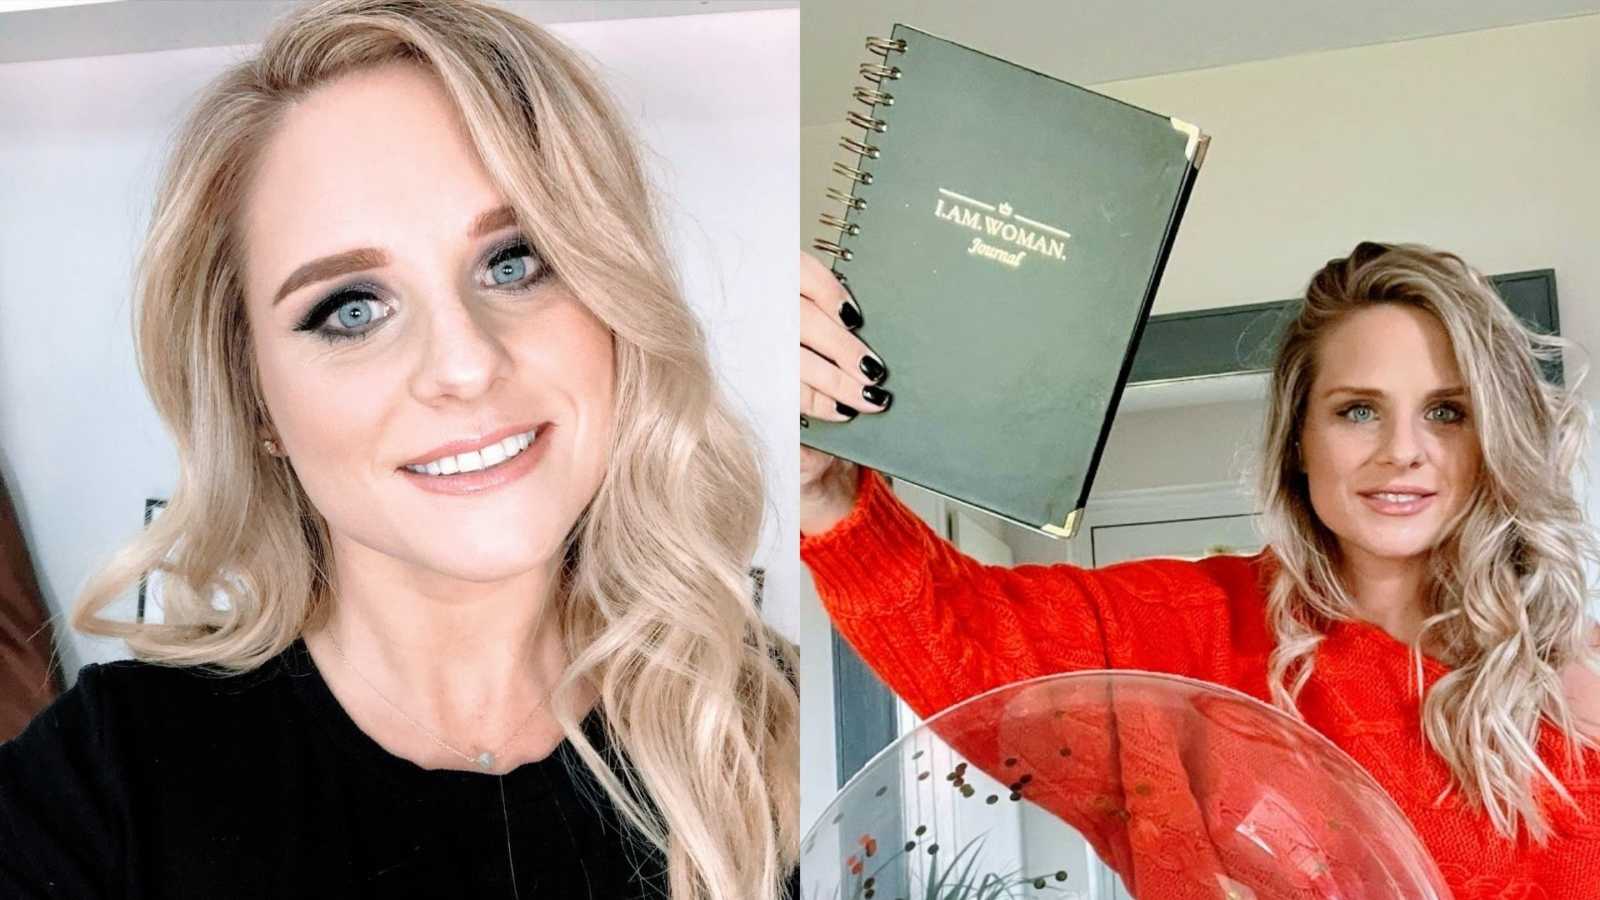 A woman with long blonde hair and a woman in a red shirt holds up a black journal